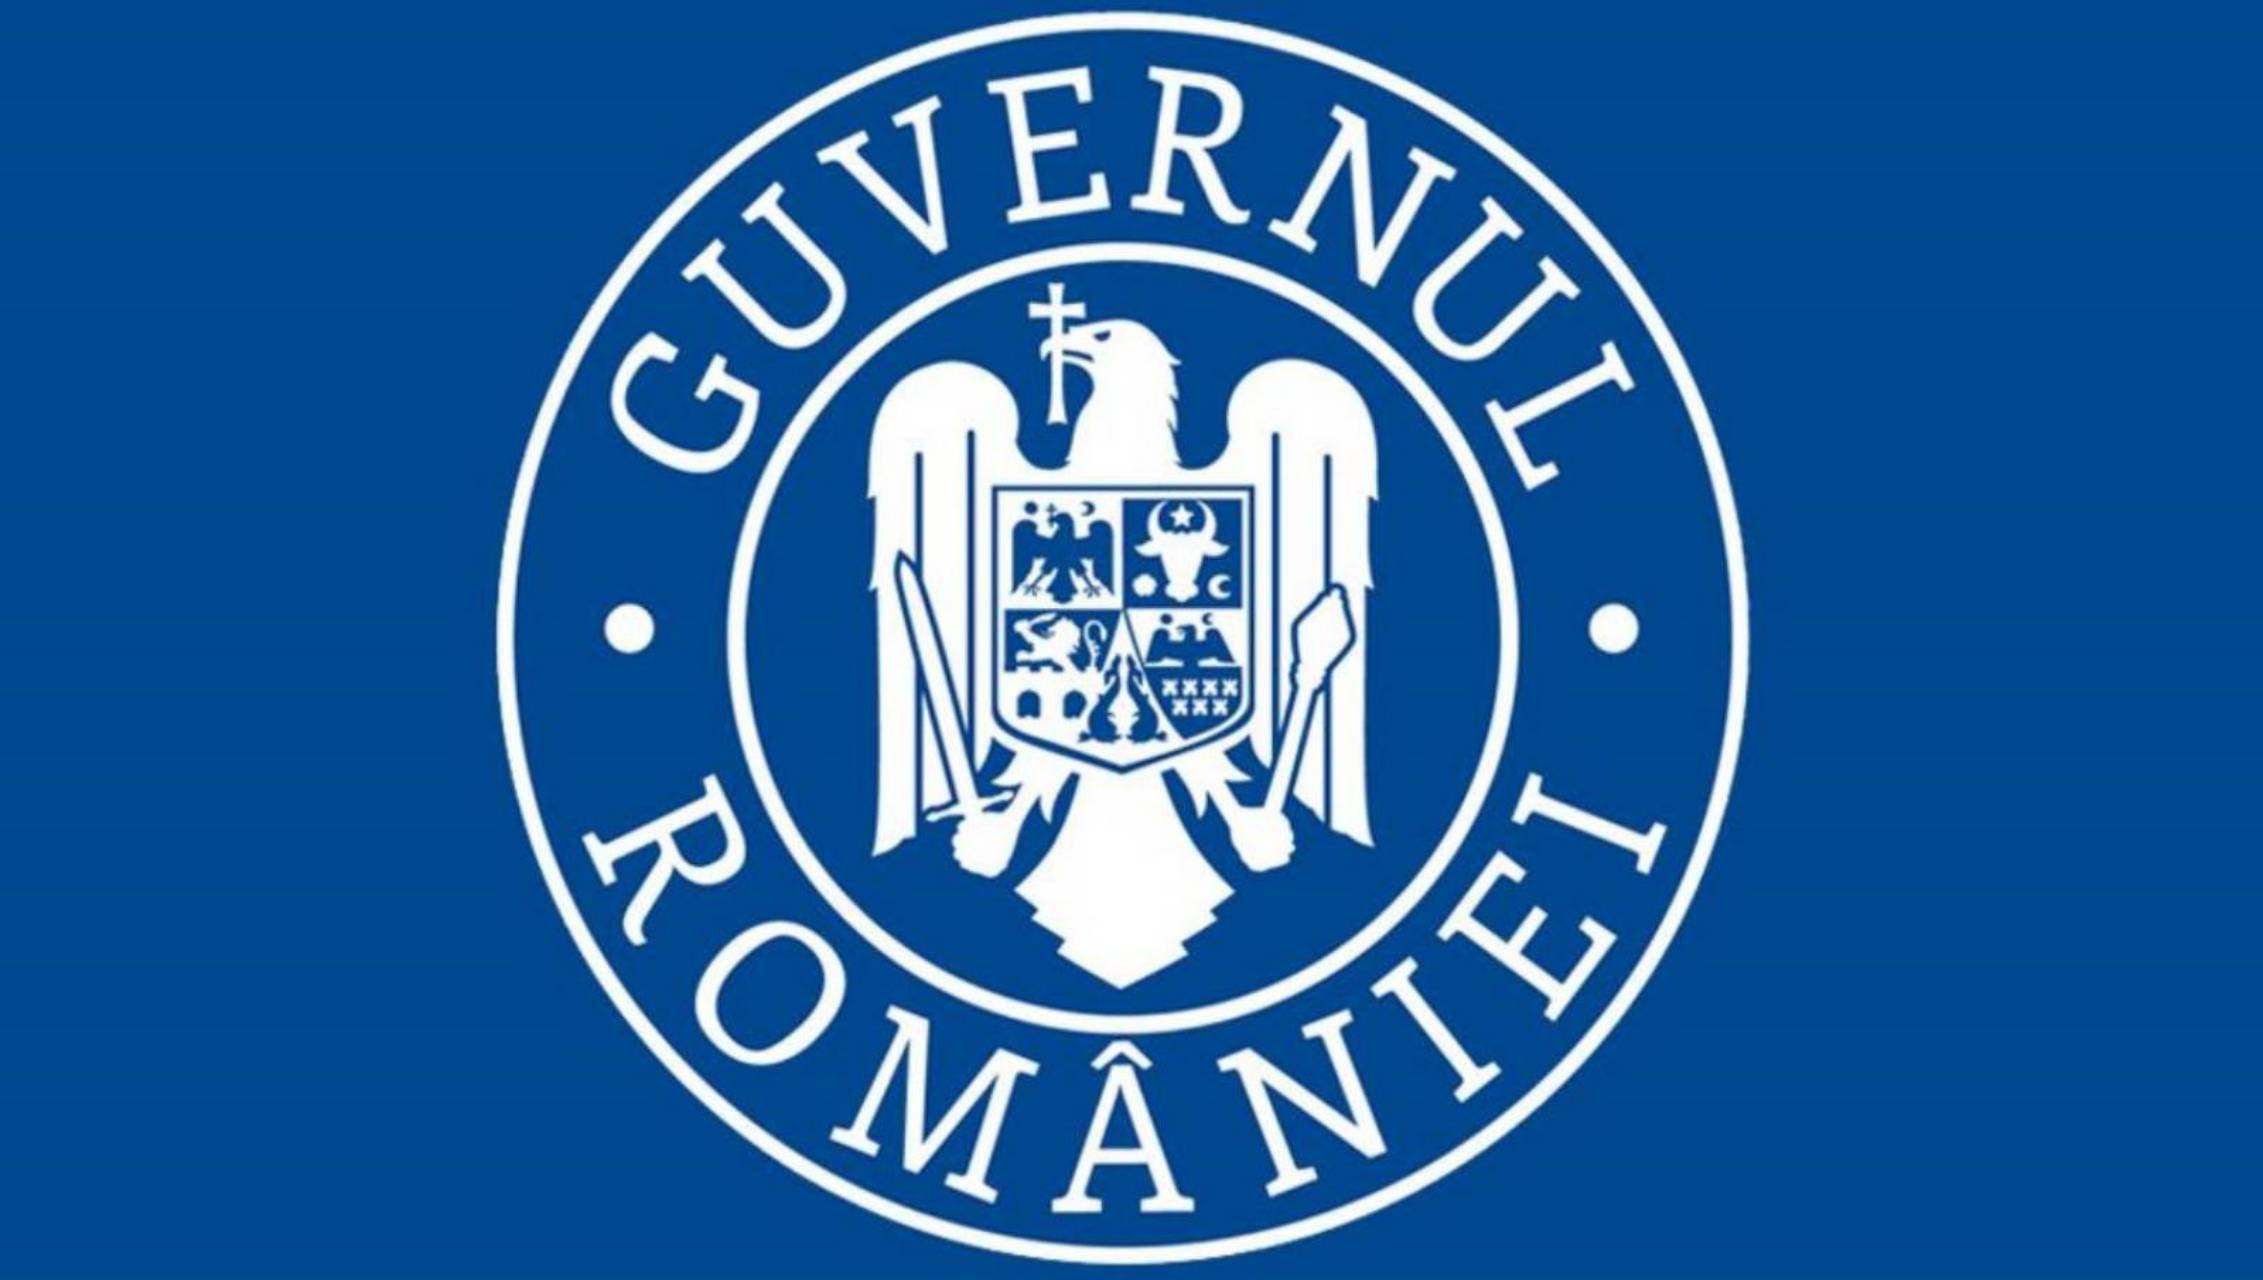 The Romanian government is warning Romanians